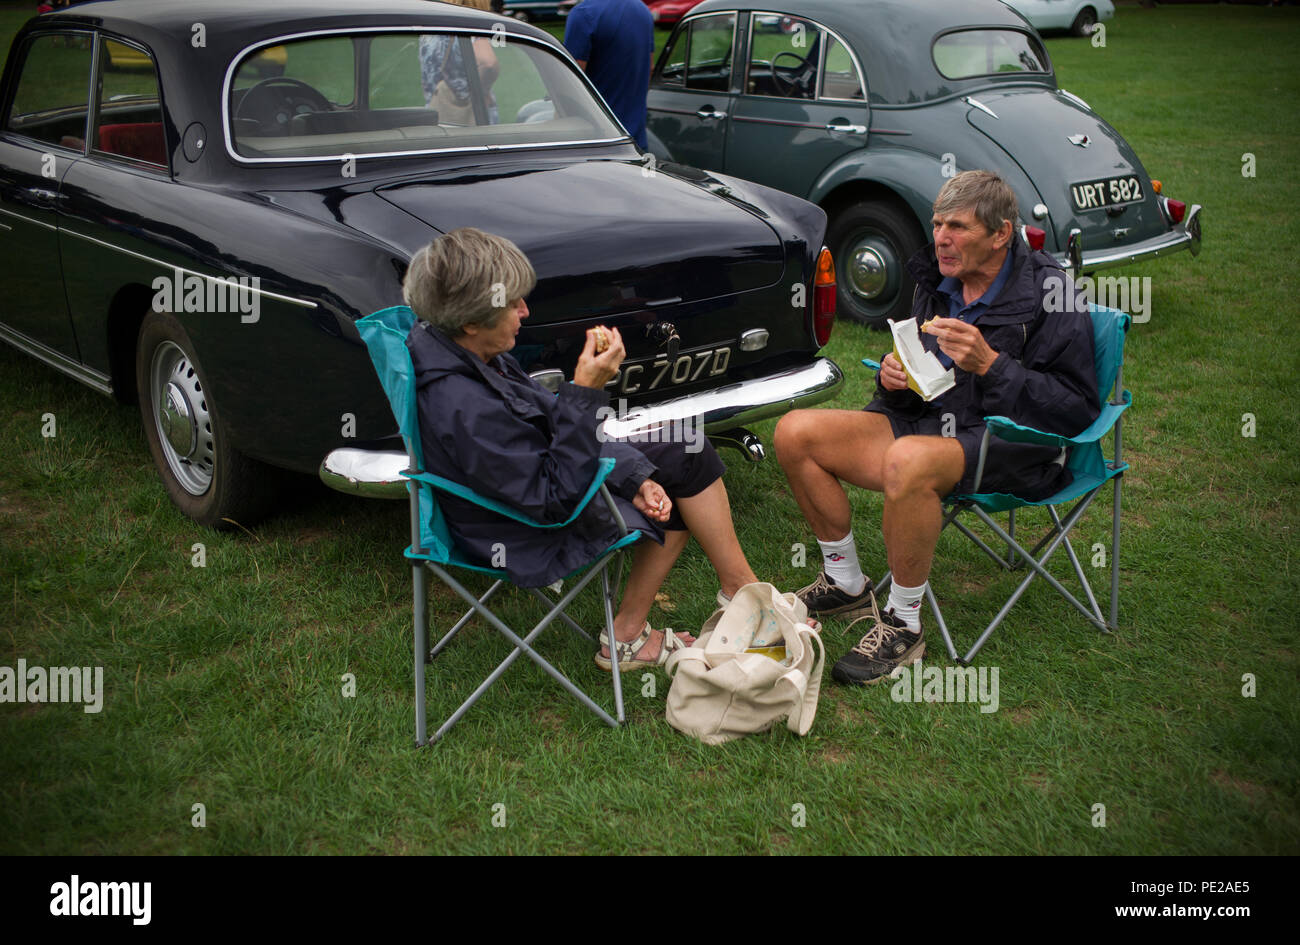 Essex, UK. 12th August 2018. Saffron Walden Motor Show 12 August 2018 Lunch being taken by those exhibiting their classic and vintage cars. More than 500 classic and vintage cars, motor bikes were on display at the annual Saffron Walden Motor Show on Saffron walden common. Money raised goes to the Arthur Rank Hospice and Riding for the disabled in nearby Radwinter. Credit: BRIAN HARRIS/Alamy Live News Stock Photo